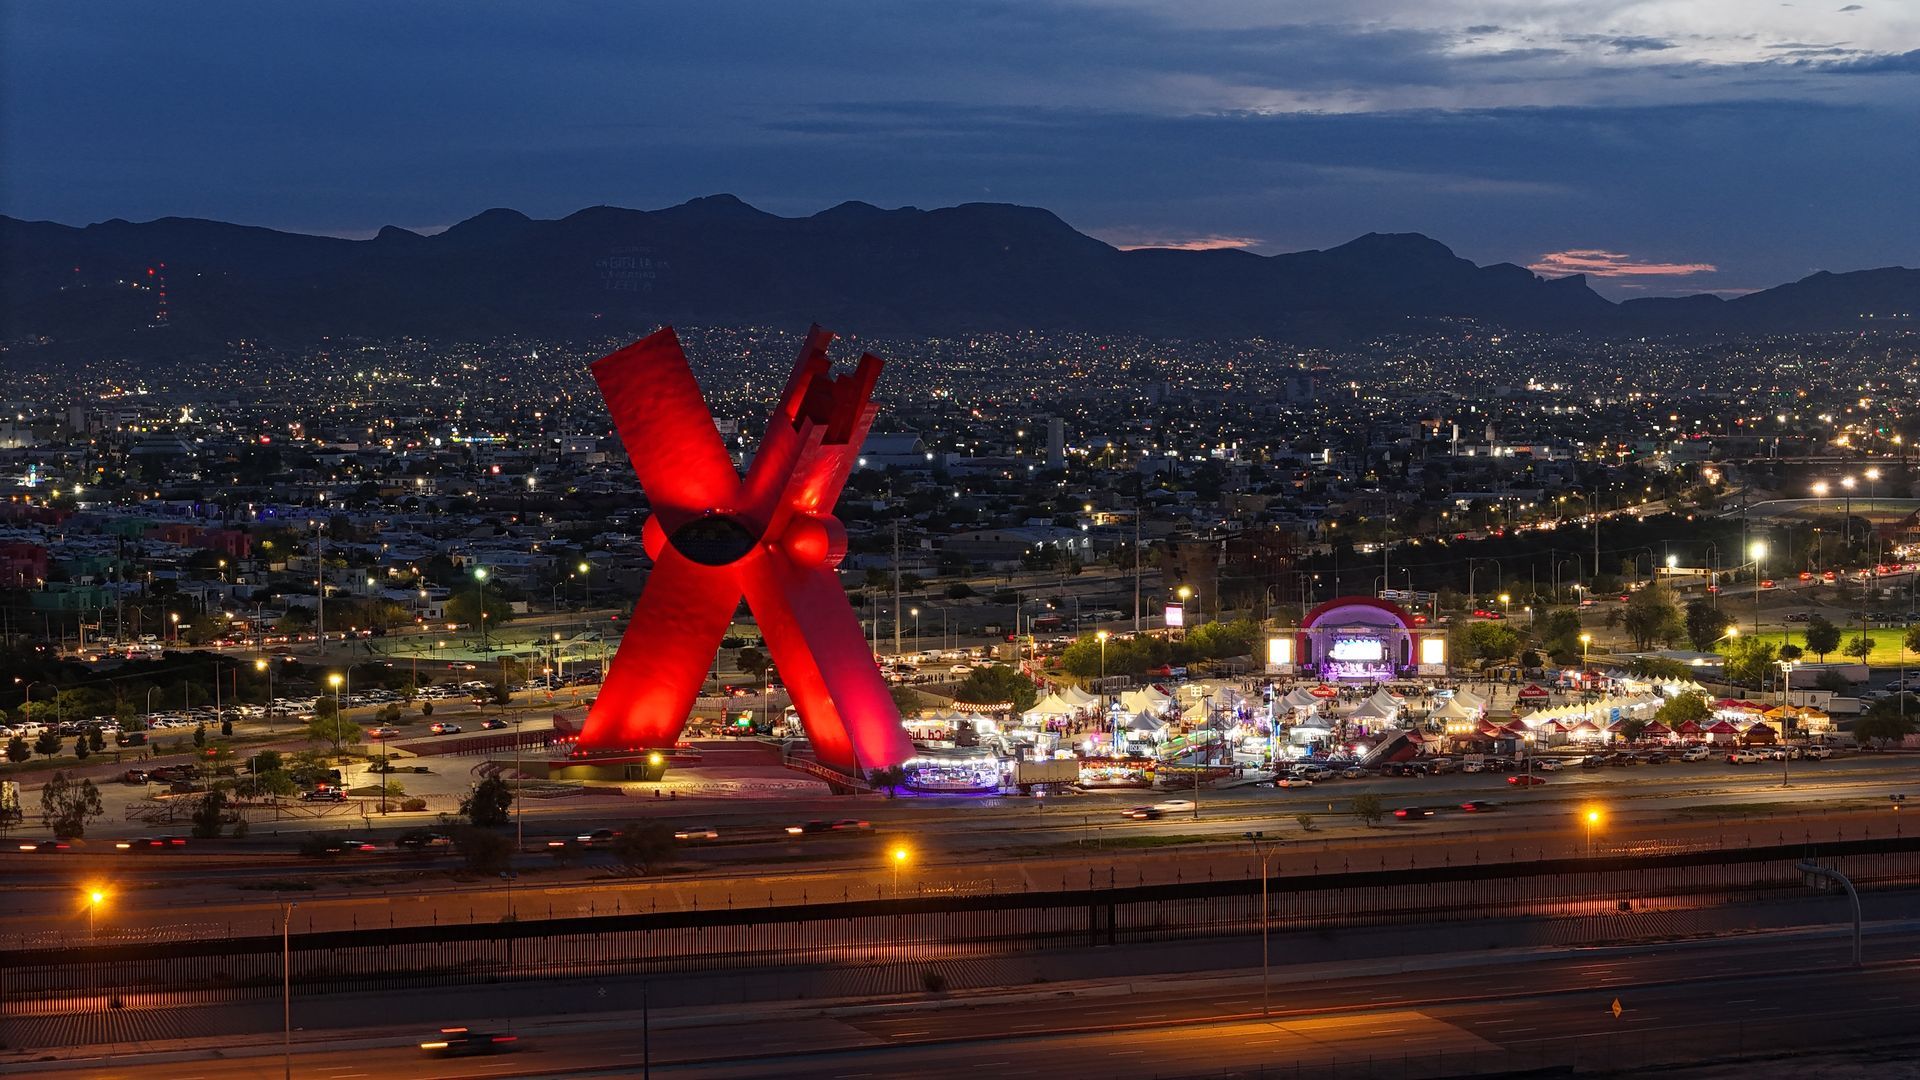 Plaza de X Monument in Juarez: An image capturing the Plaza de X Monument in Juarez. The monument displays a significant structure or sculpture situated within the plaza. 